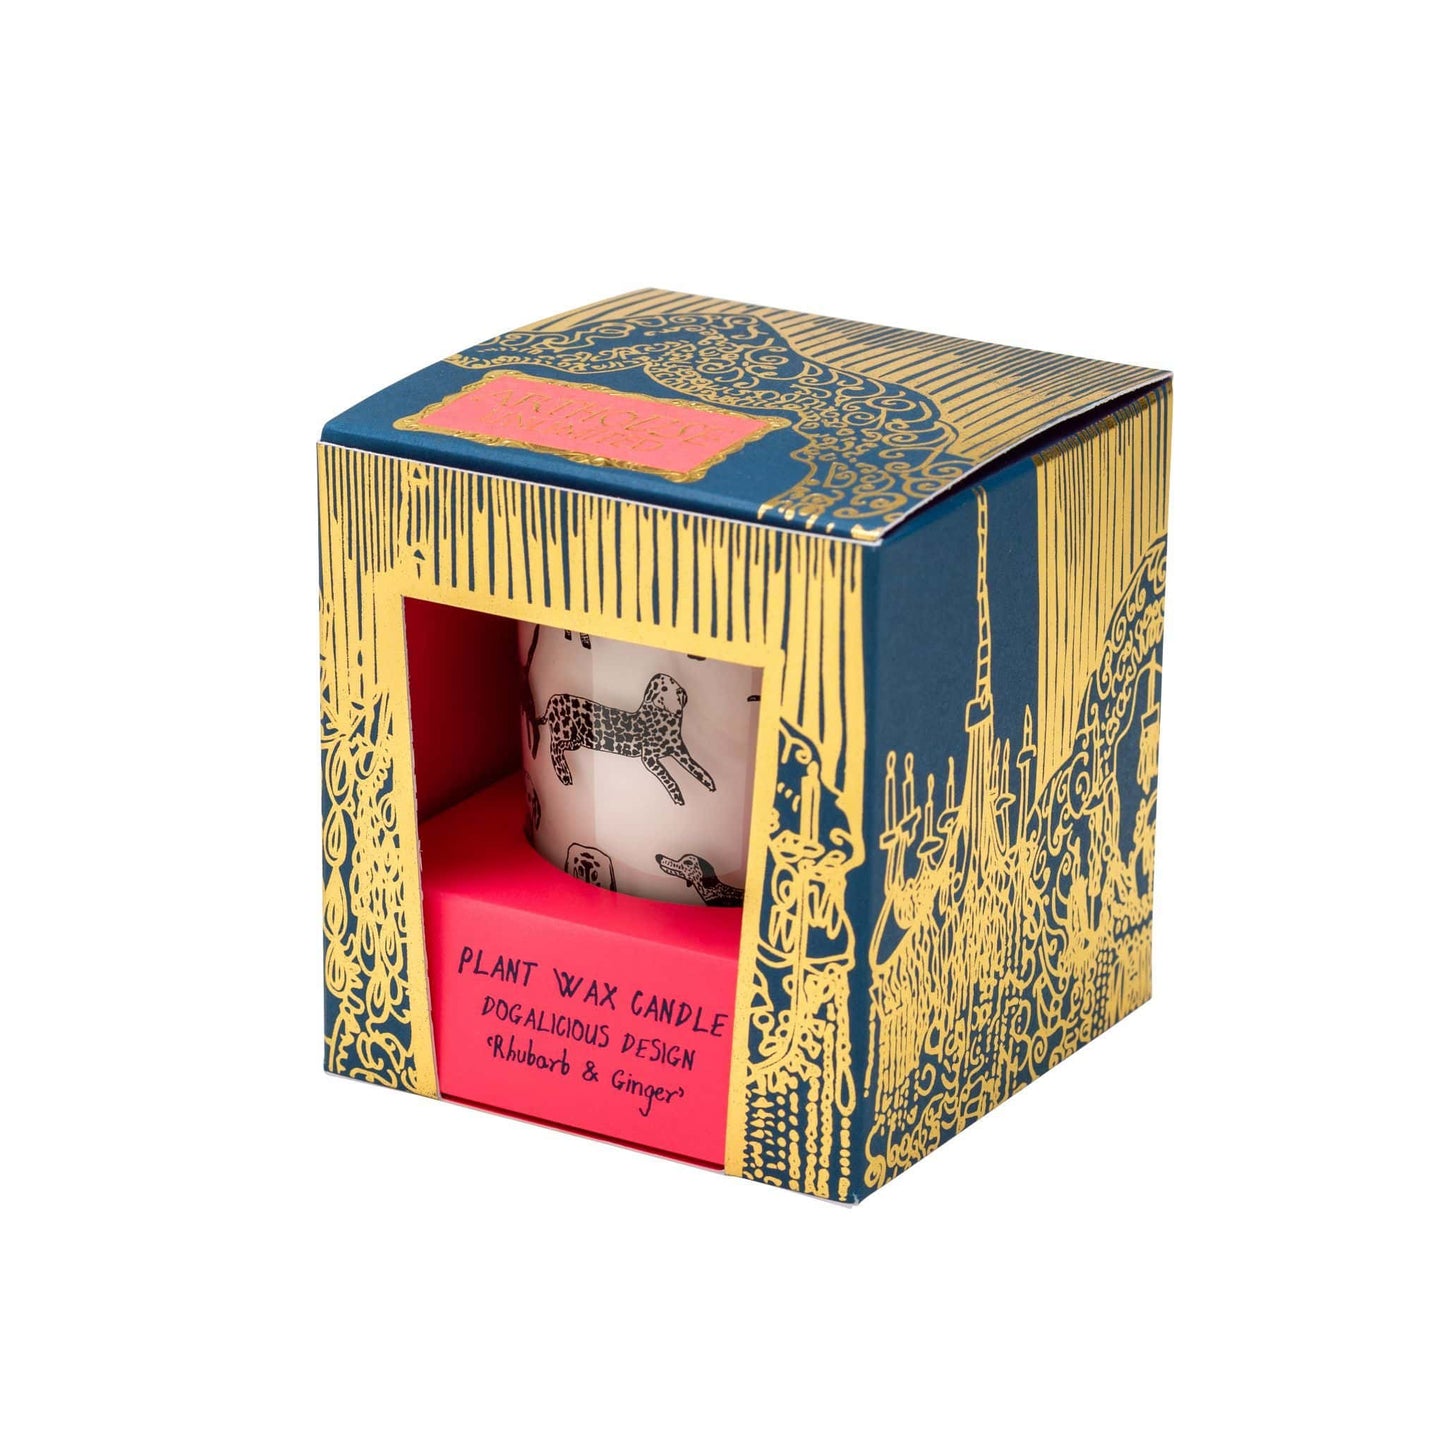 Plant Wax Candle  Rhubarb & Ginger  Dogs Design - packaging